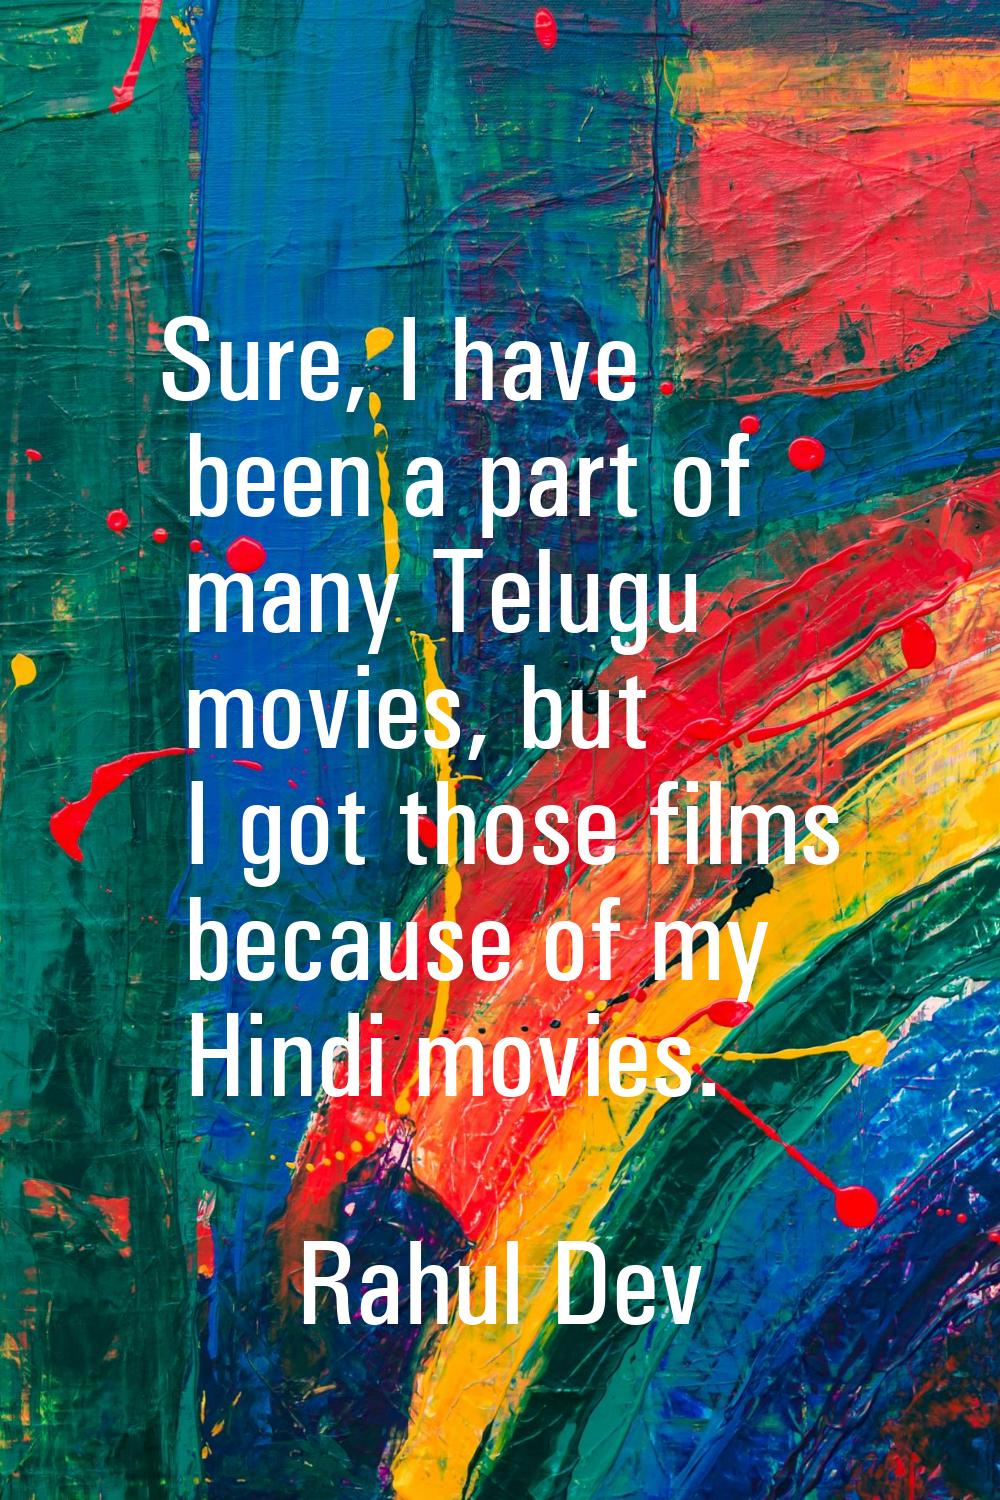 Sure, I have been a part of many Telugu movies, but I got those films because of my Hindi movies.